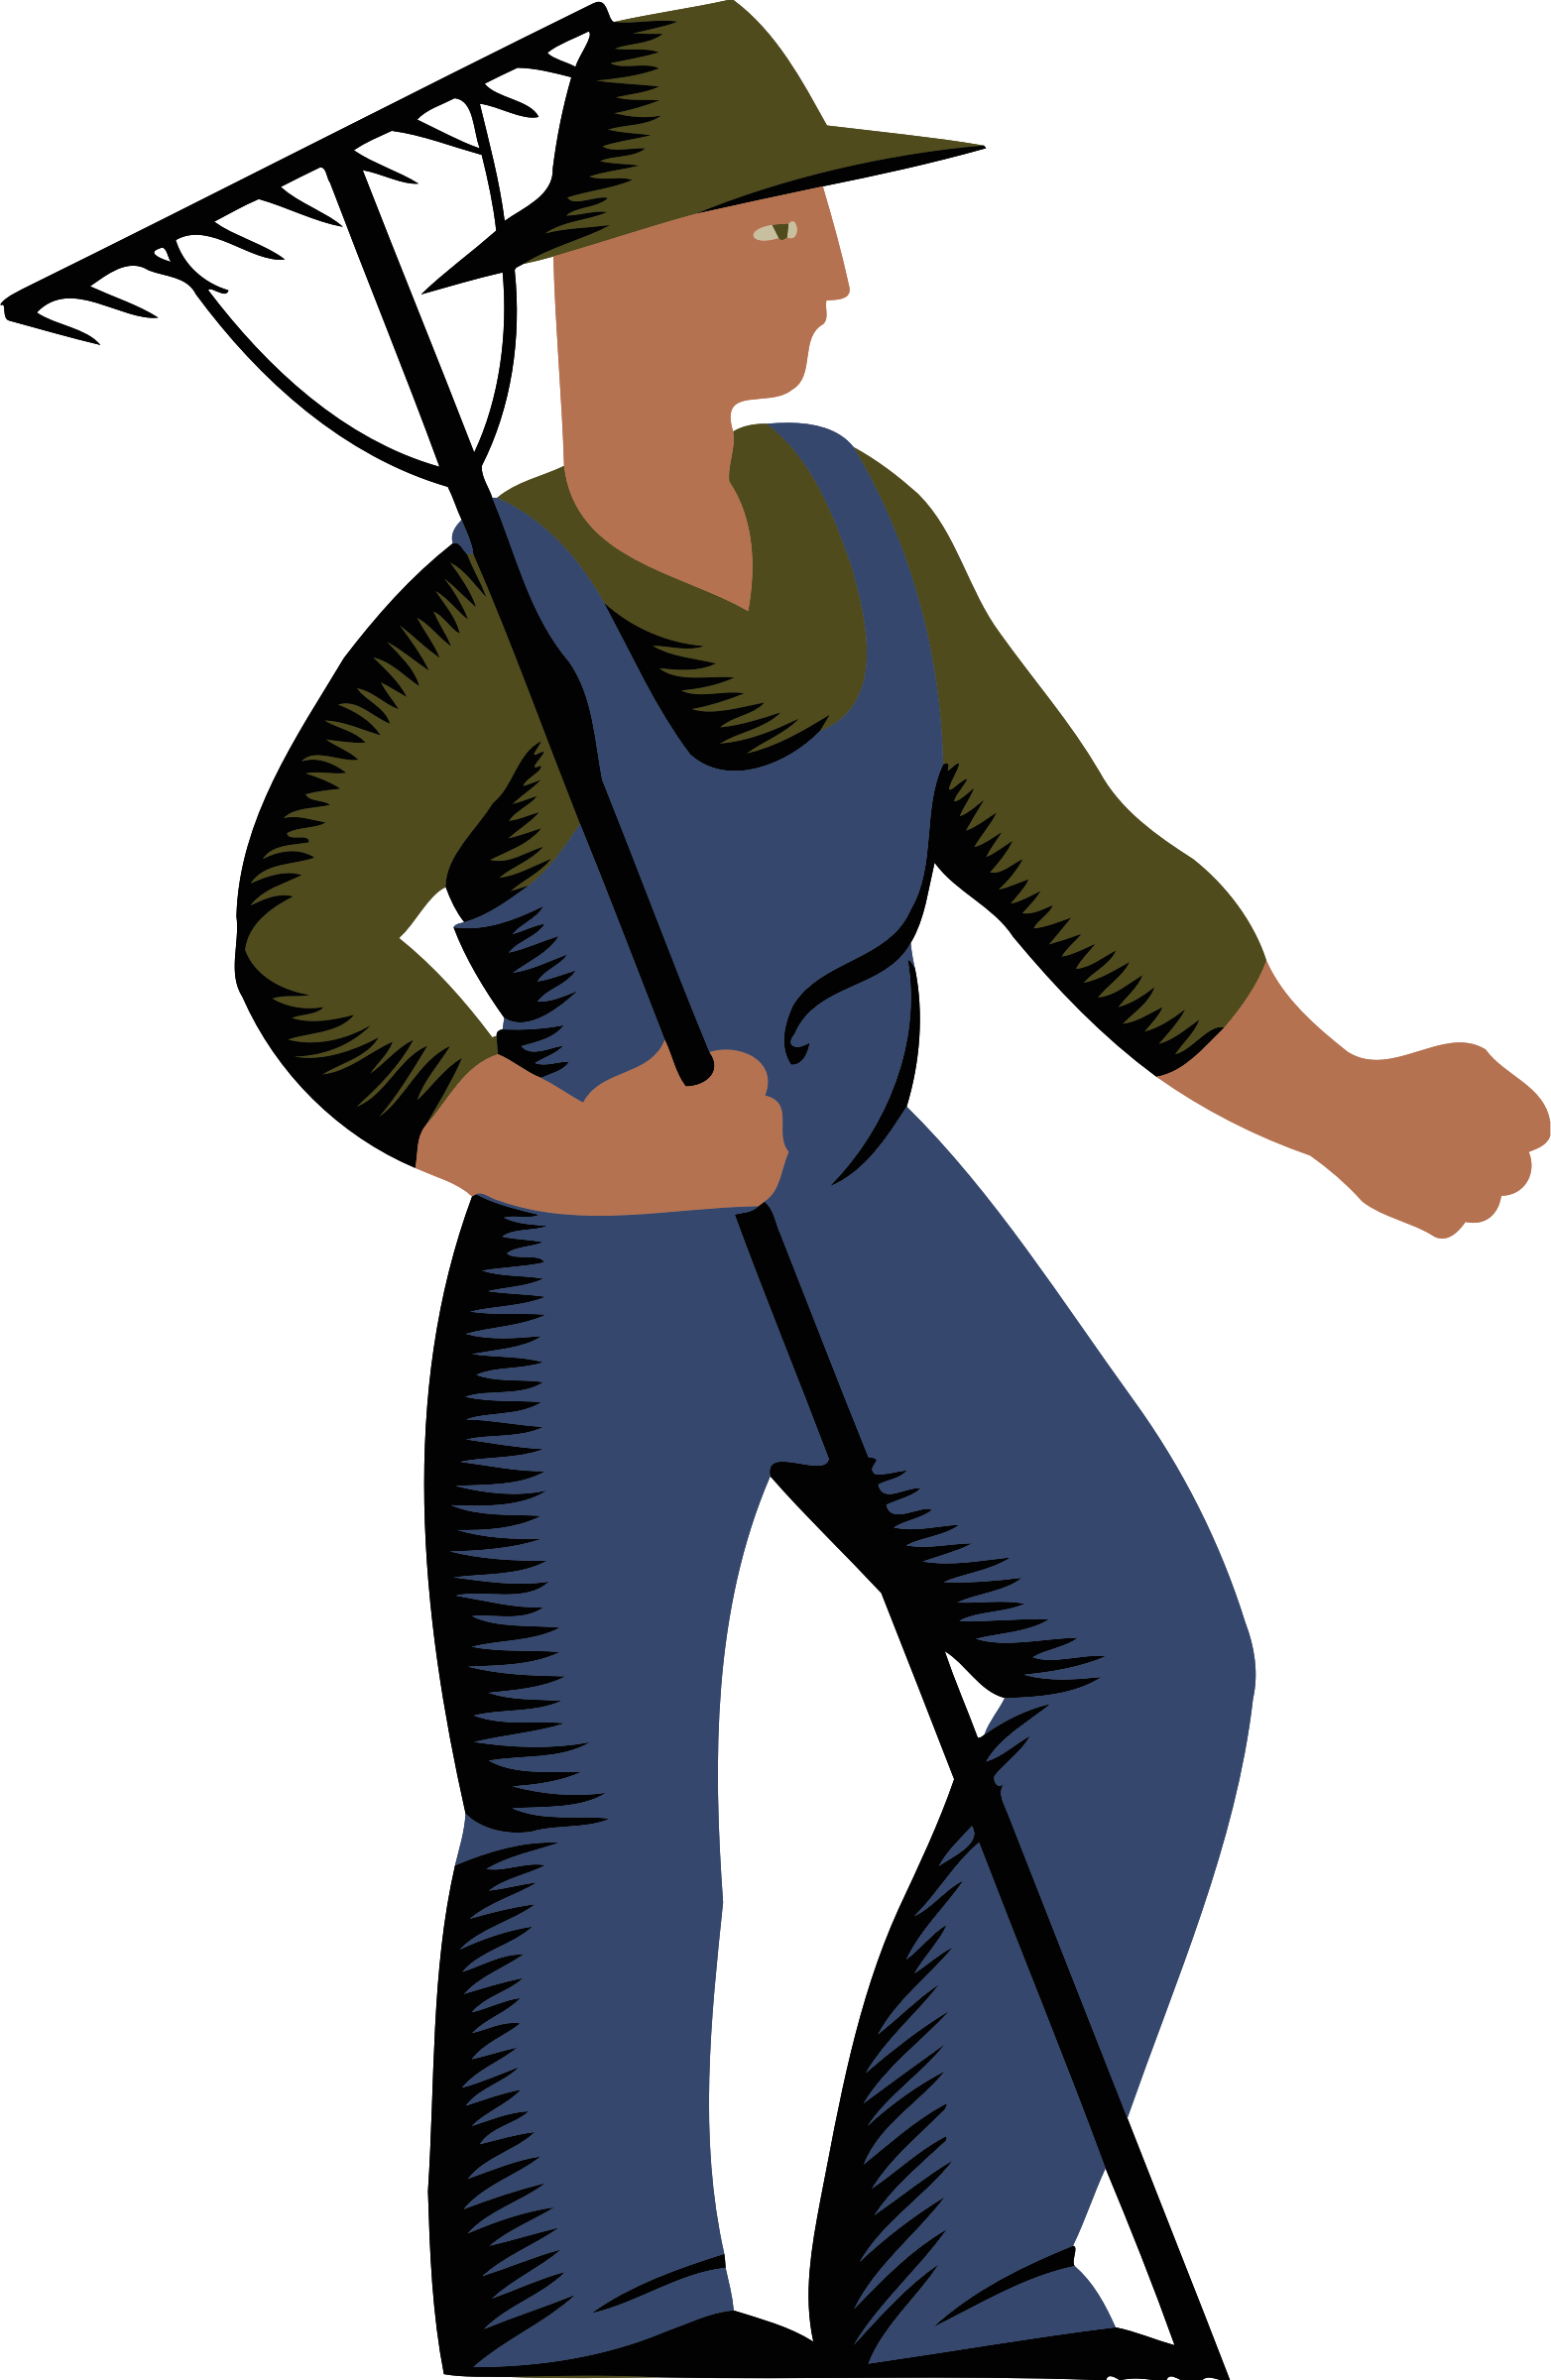 Politician clipart government worker. Big image png